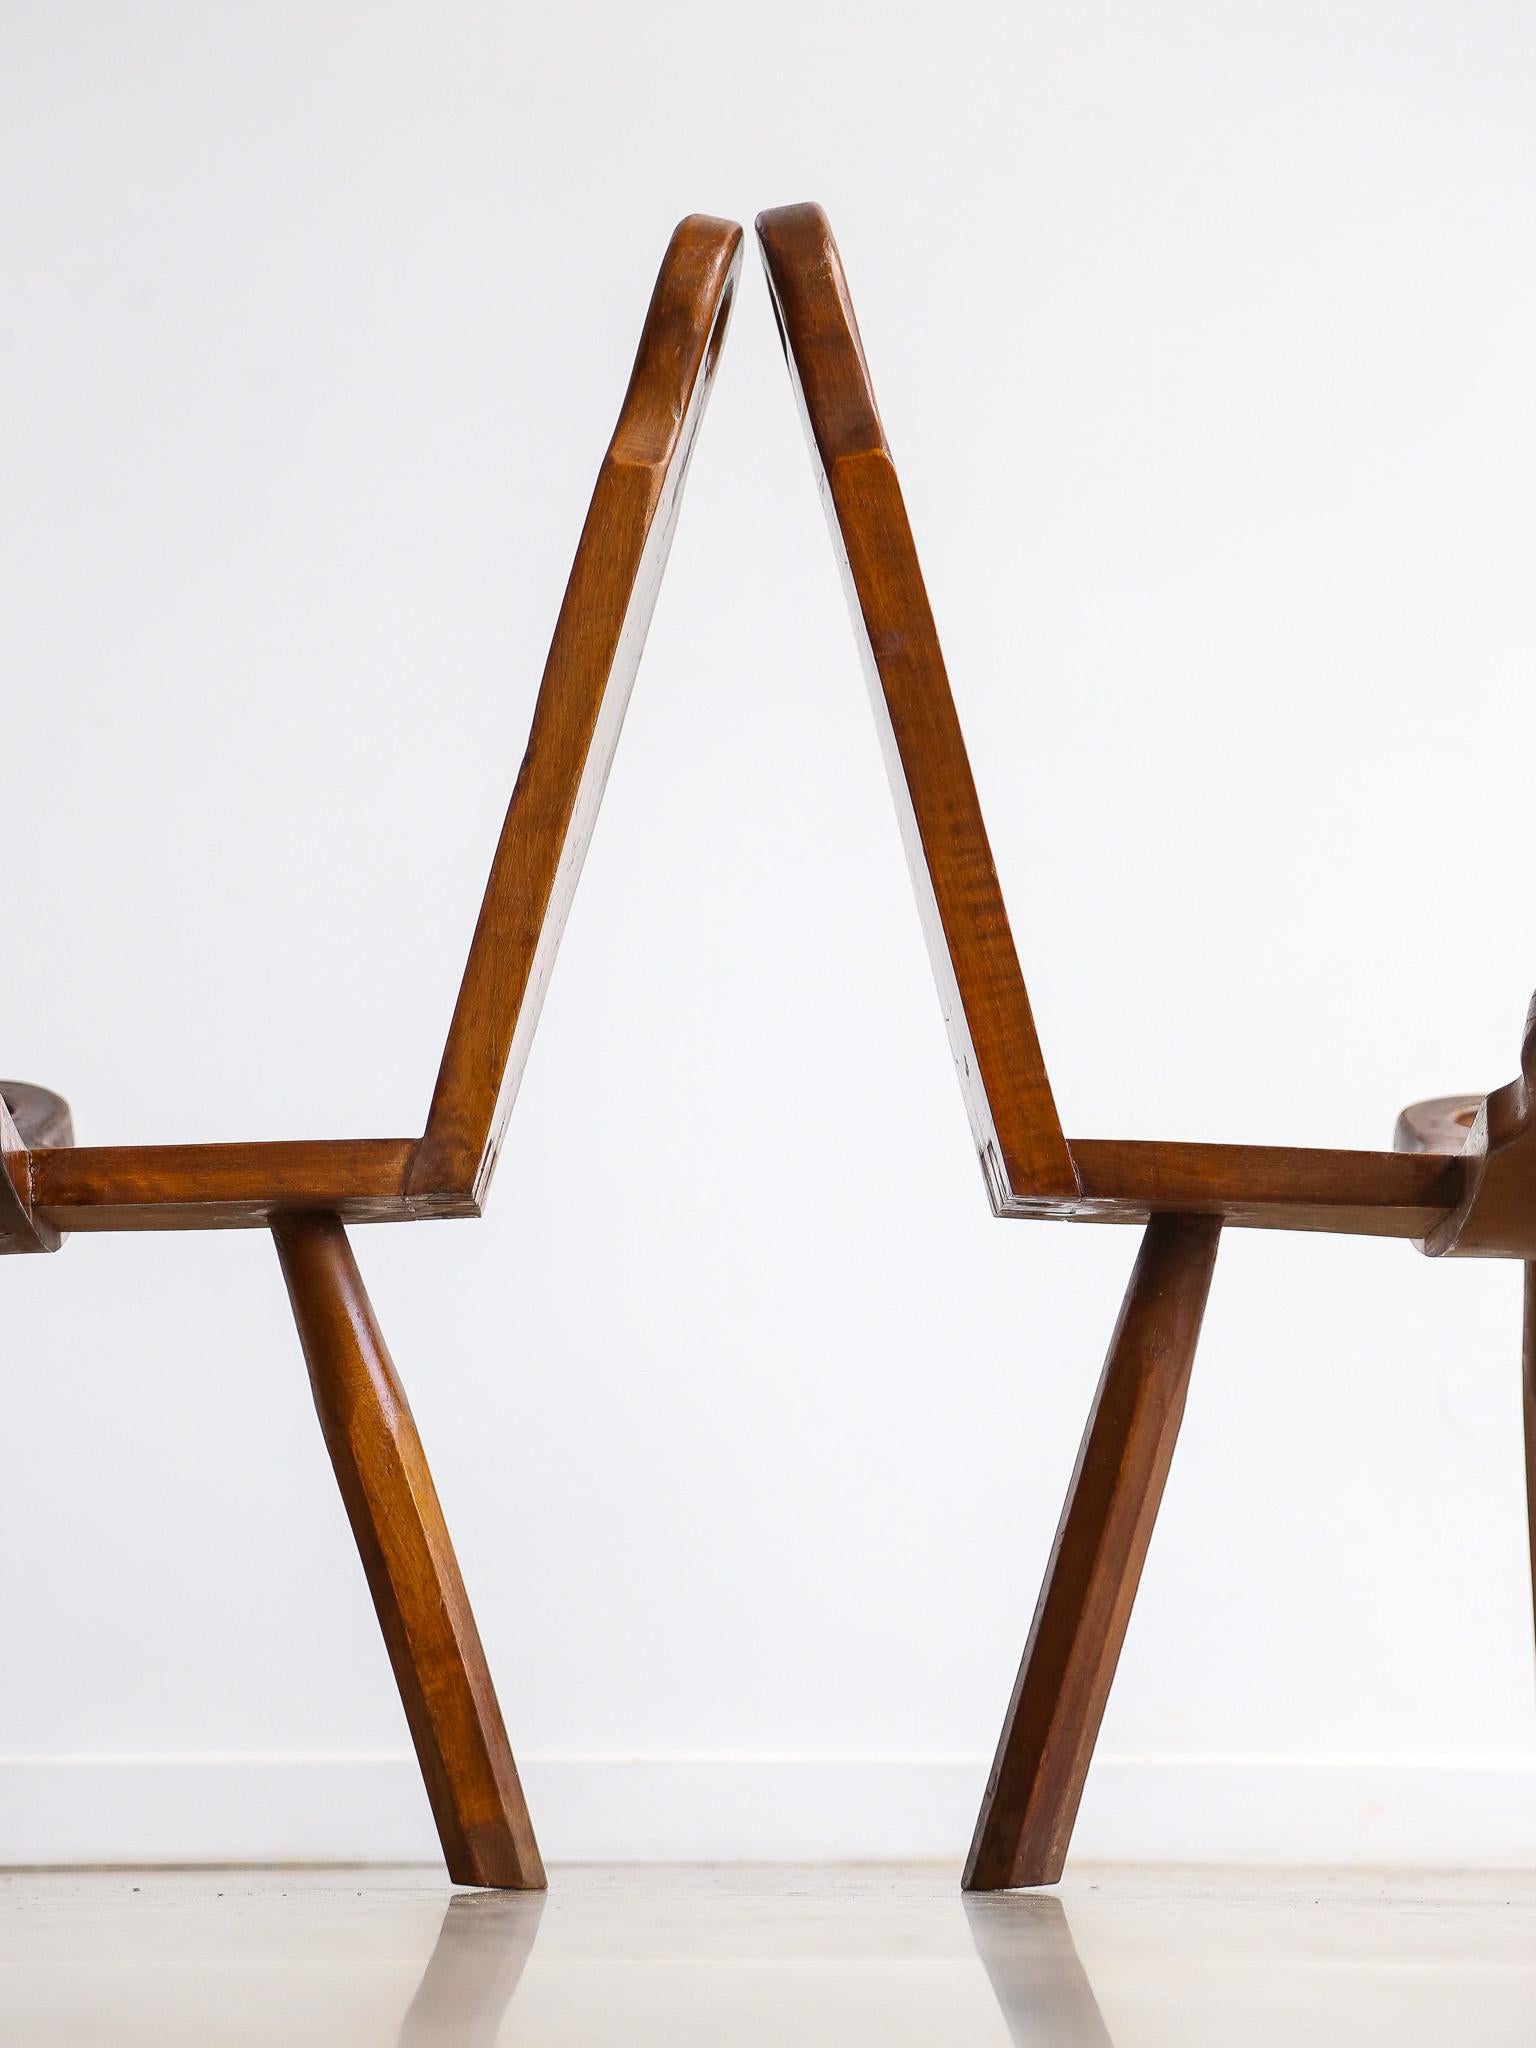 Hand-Crafted Brutalist Spanish Midcentury Sculptural Tripod Chair